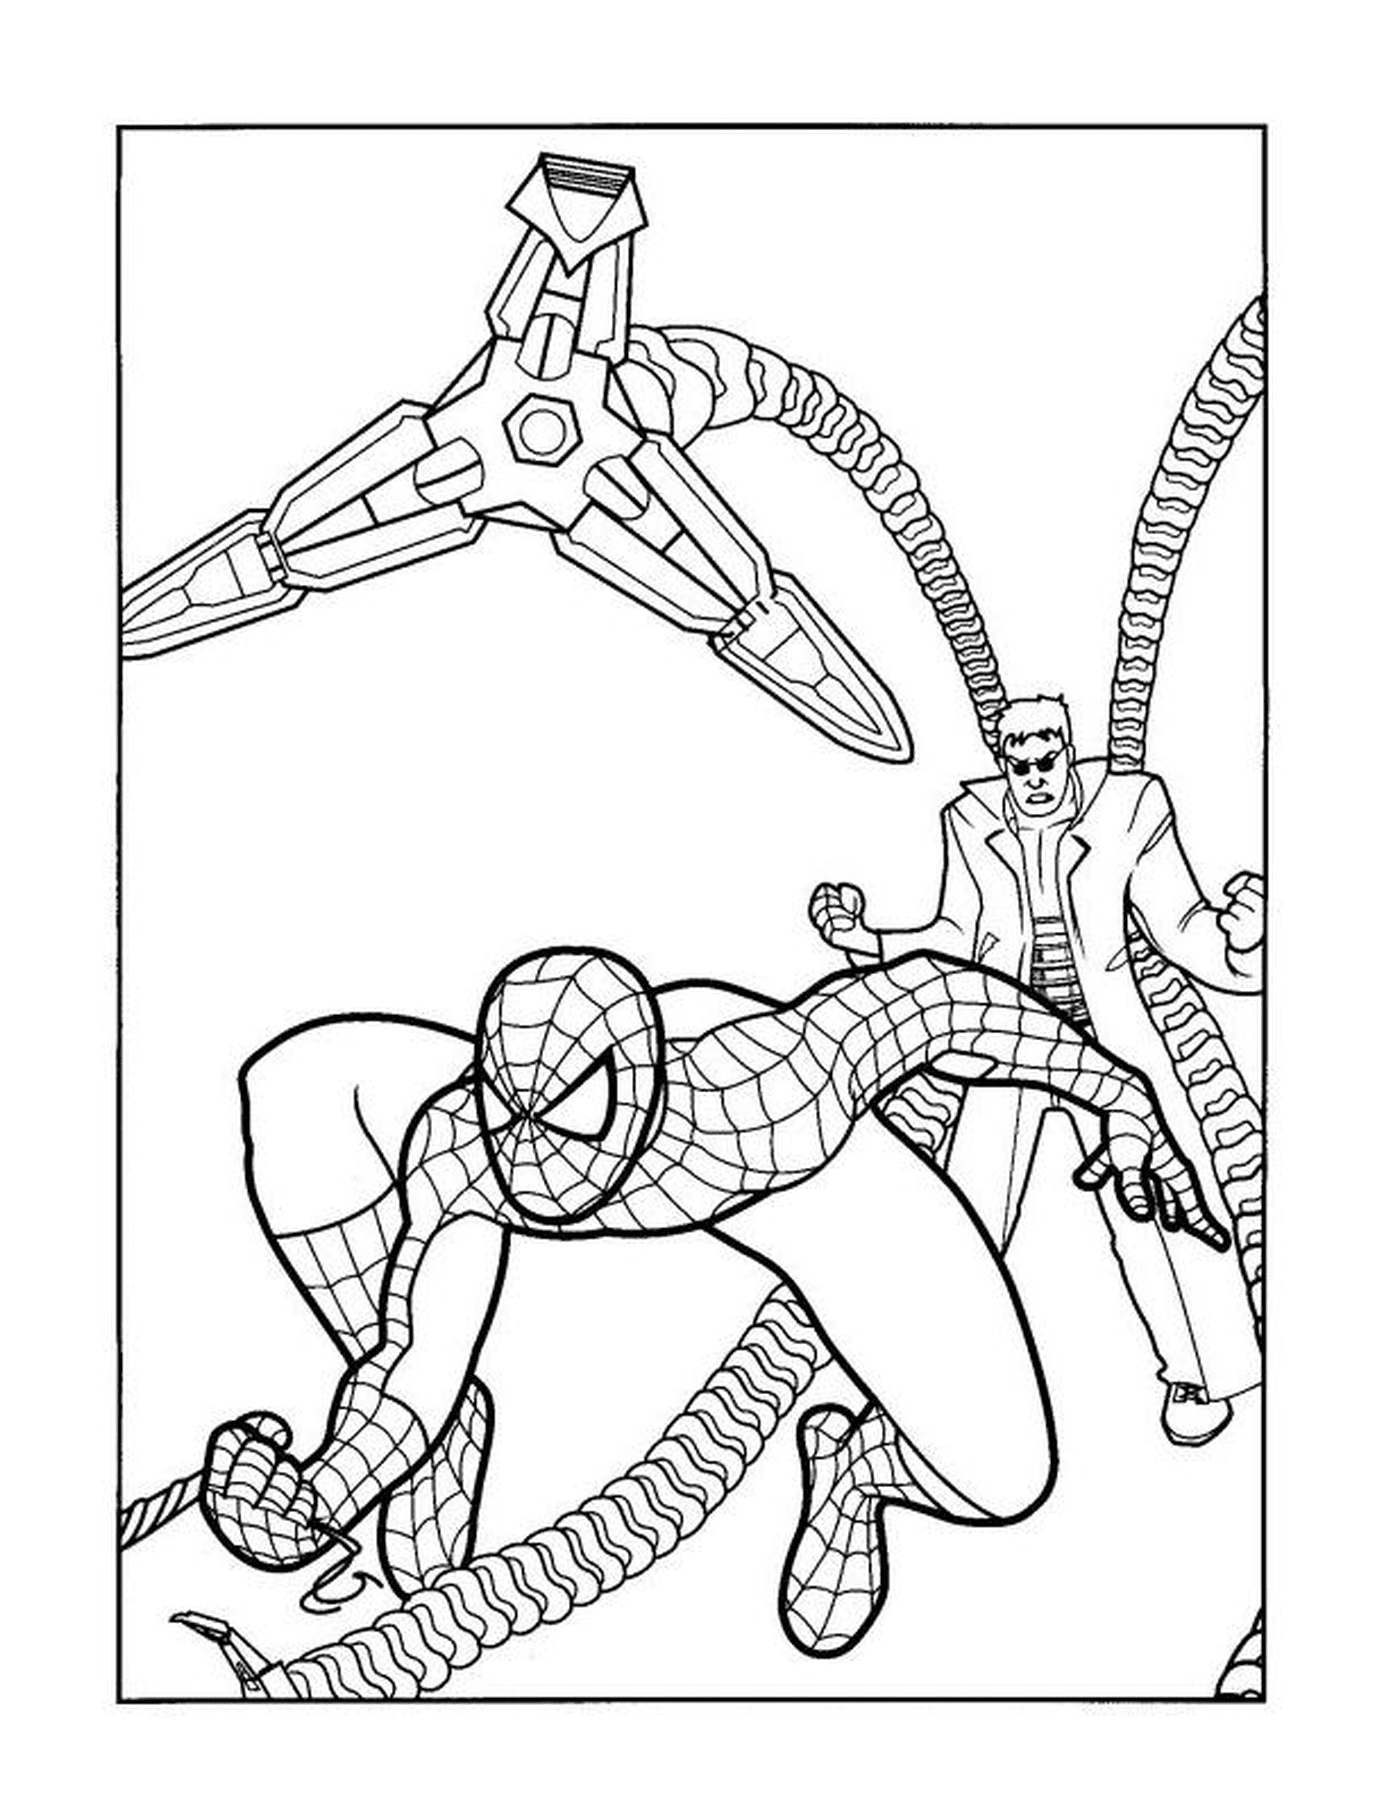  Doctor Octopus tries to catch Spiderman 